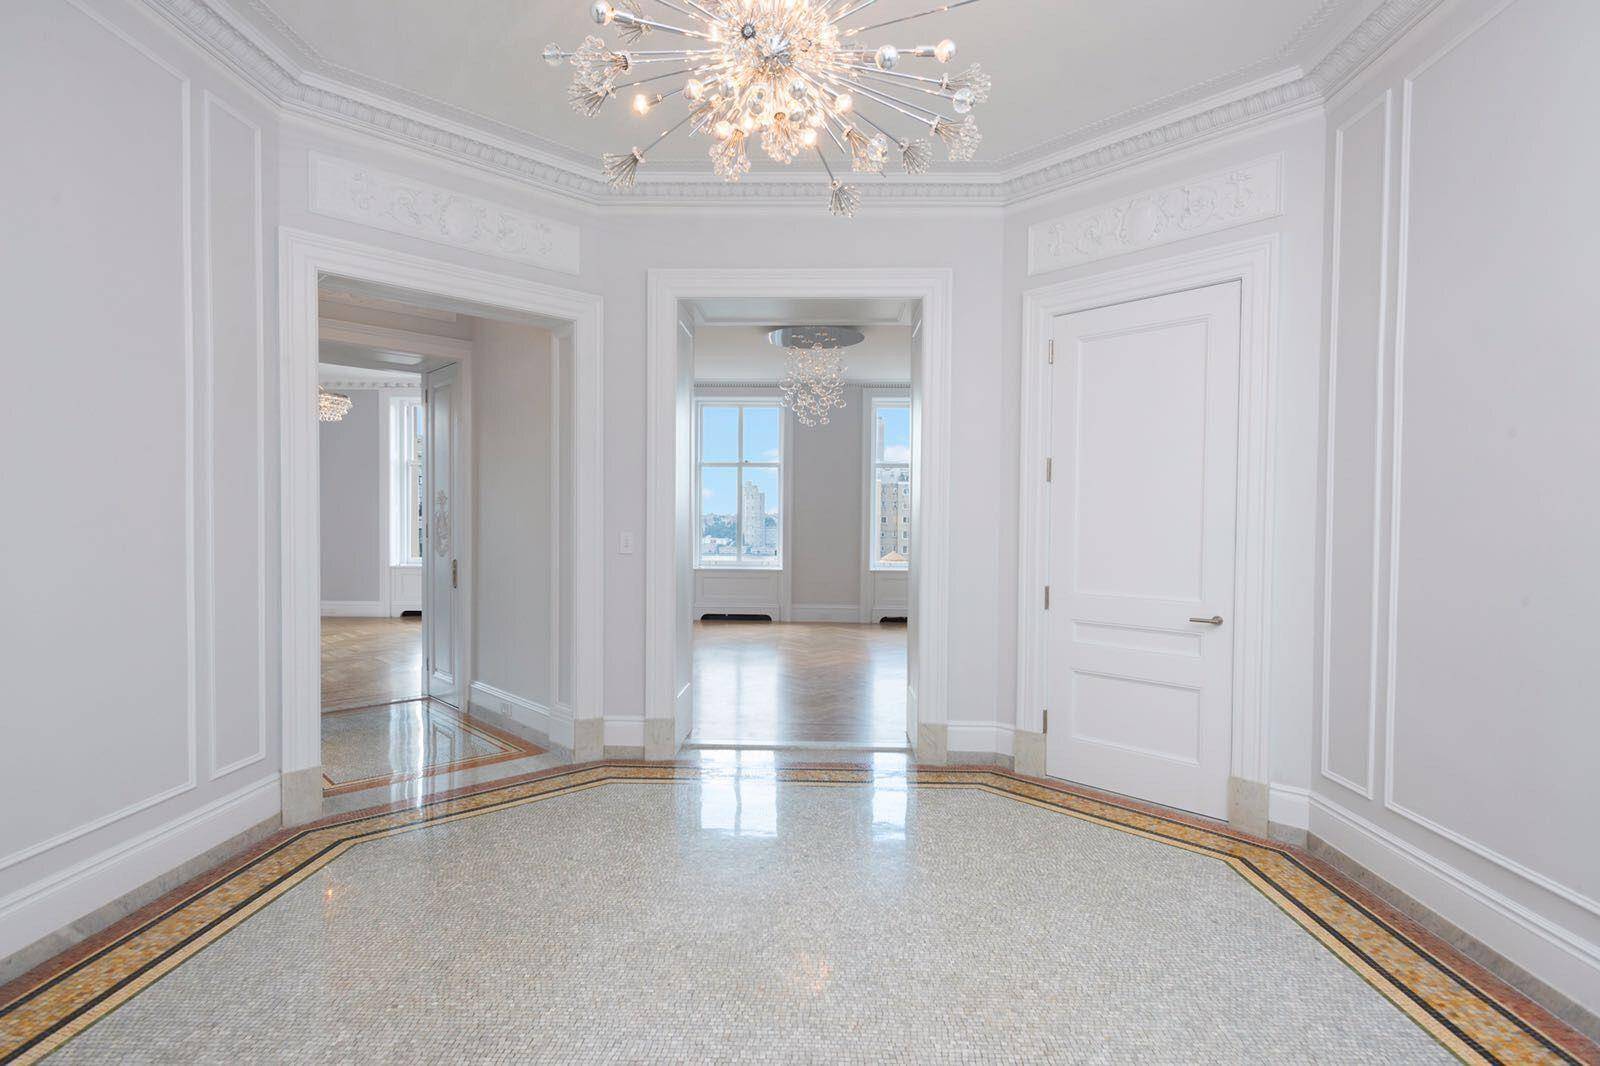 Welcome home to your stunning corner Three bedroom, Three and Half bath residence at the famed Apthorp Condominium.